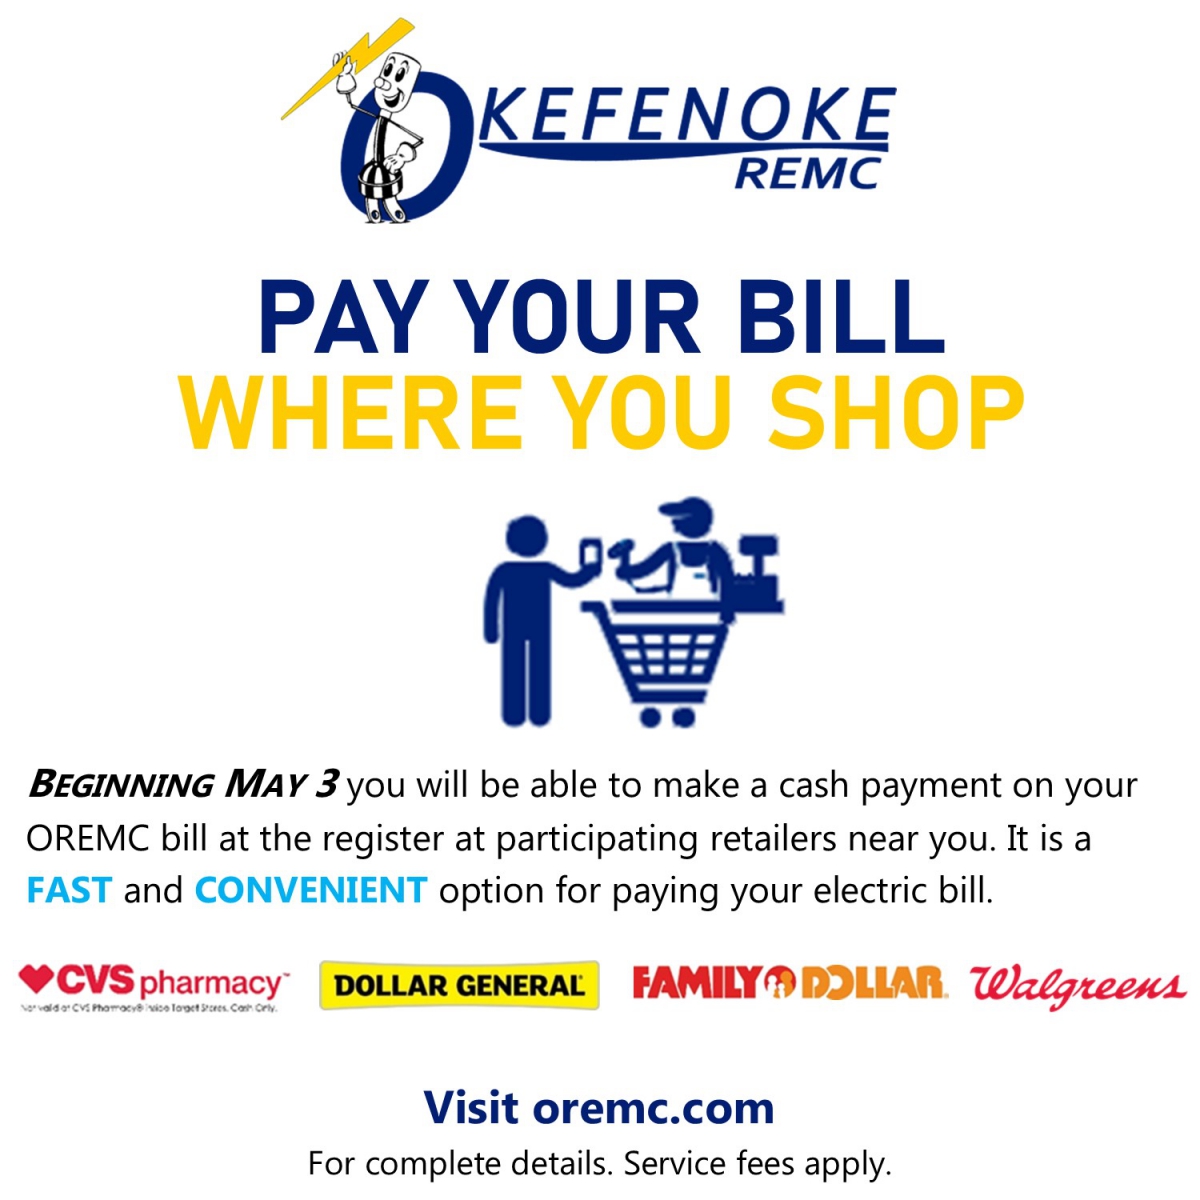 New “Pay Where You Shop” Bill Payment Option